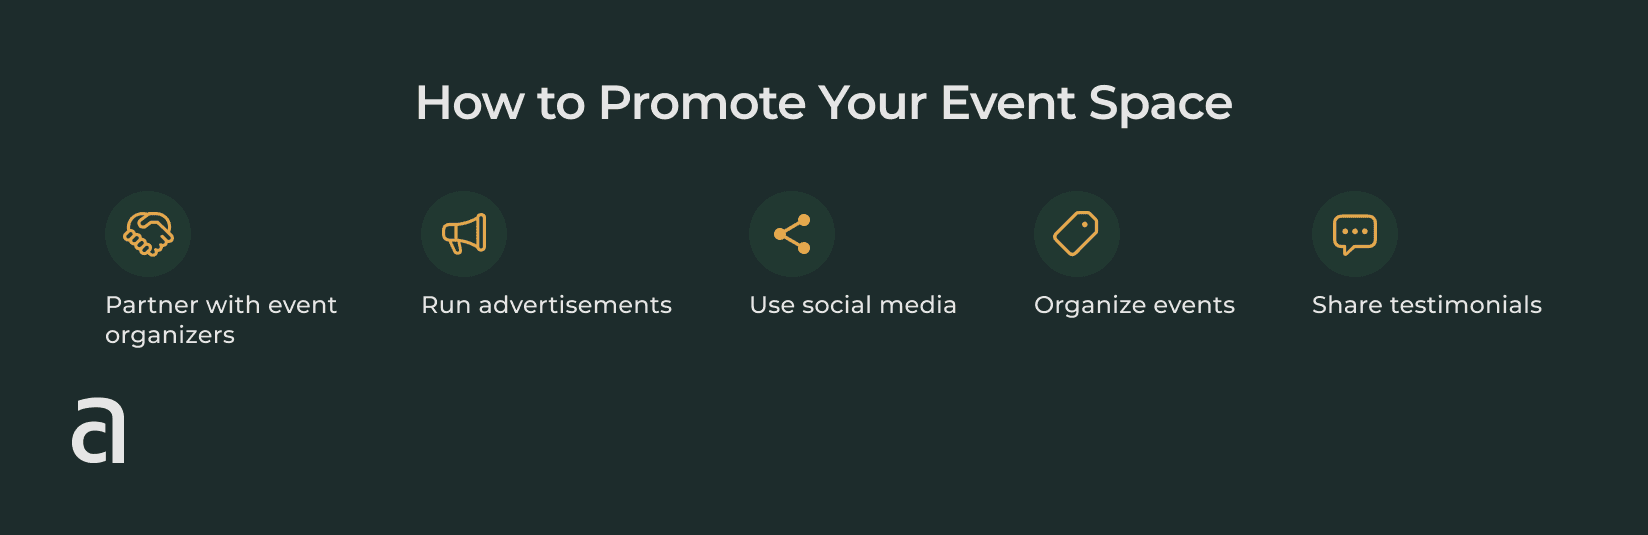 How to promote your event space